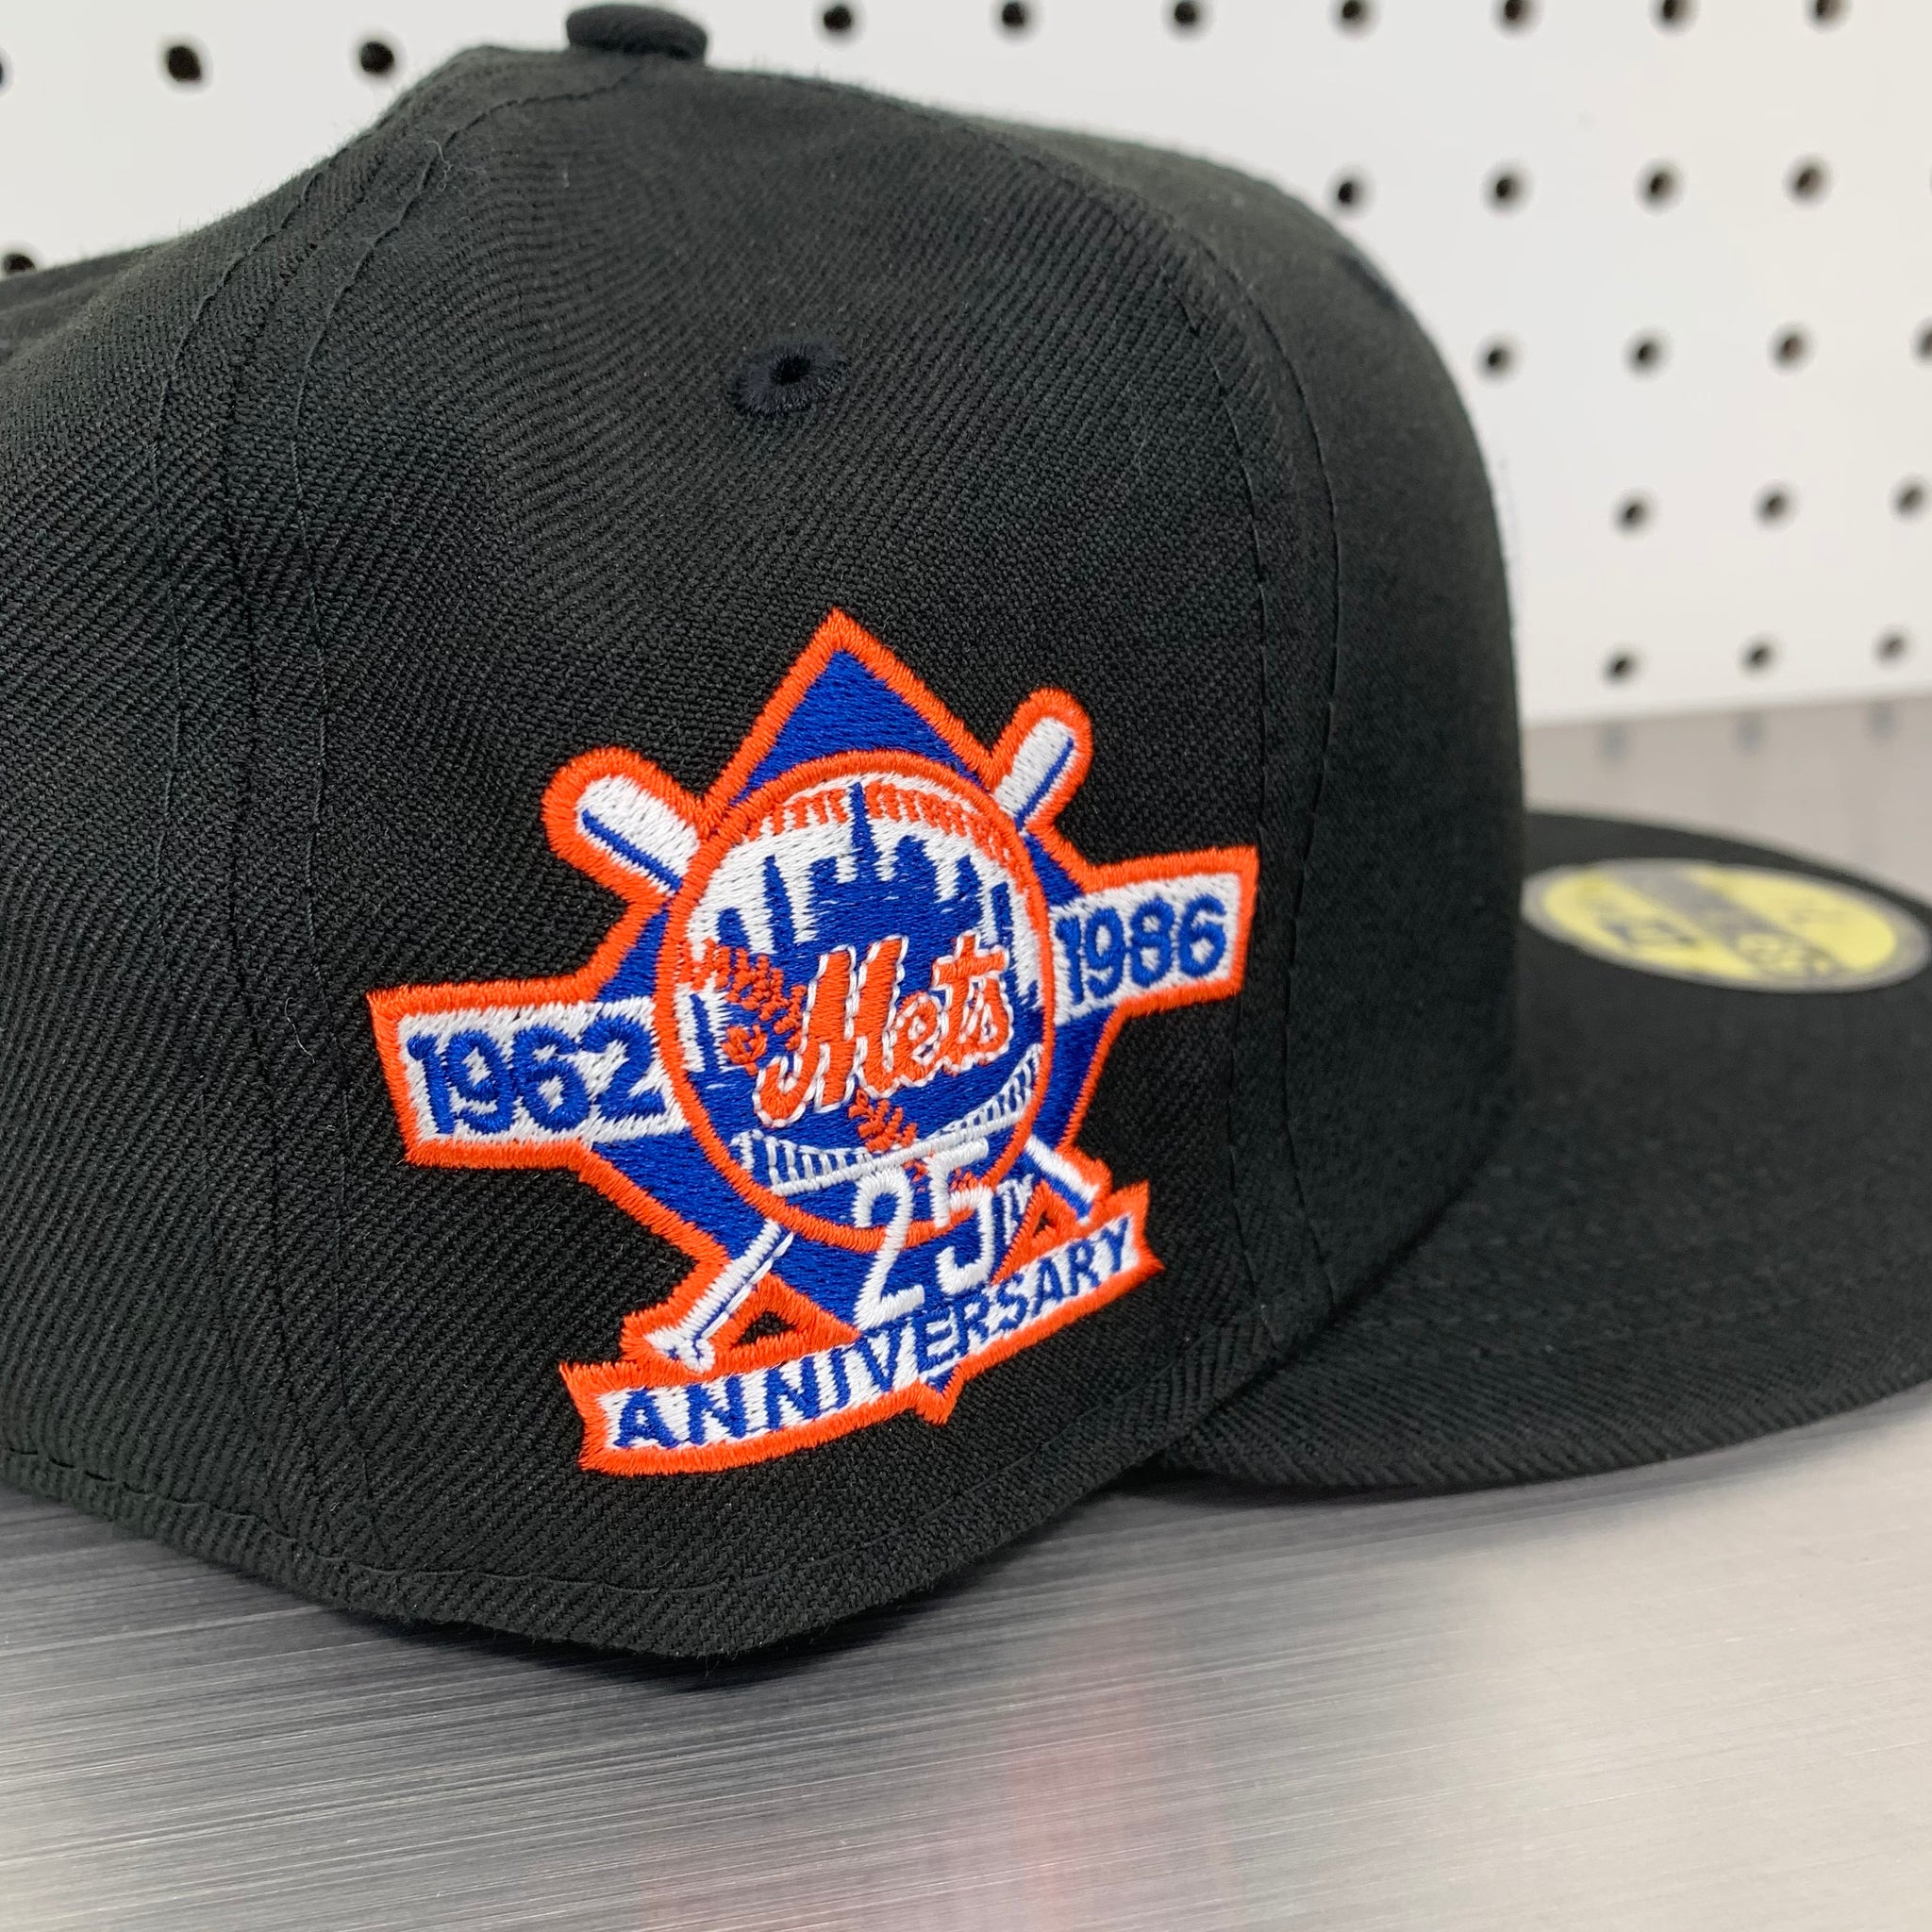 New York Mets 25th Anniversary patch